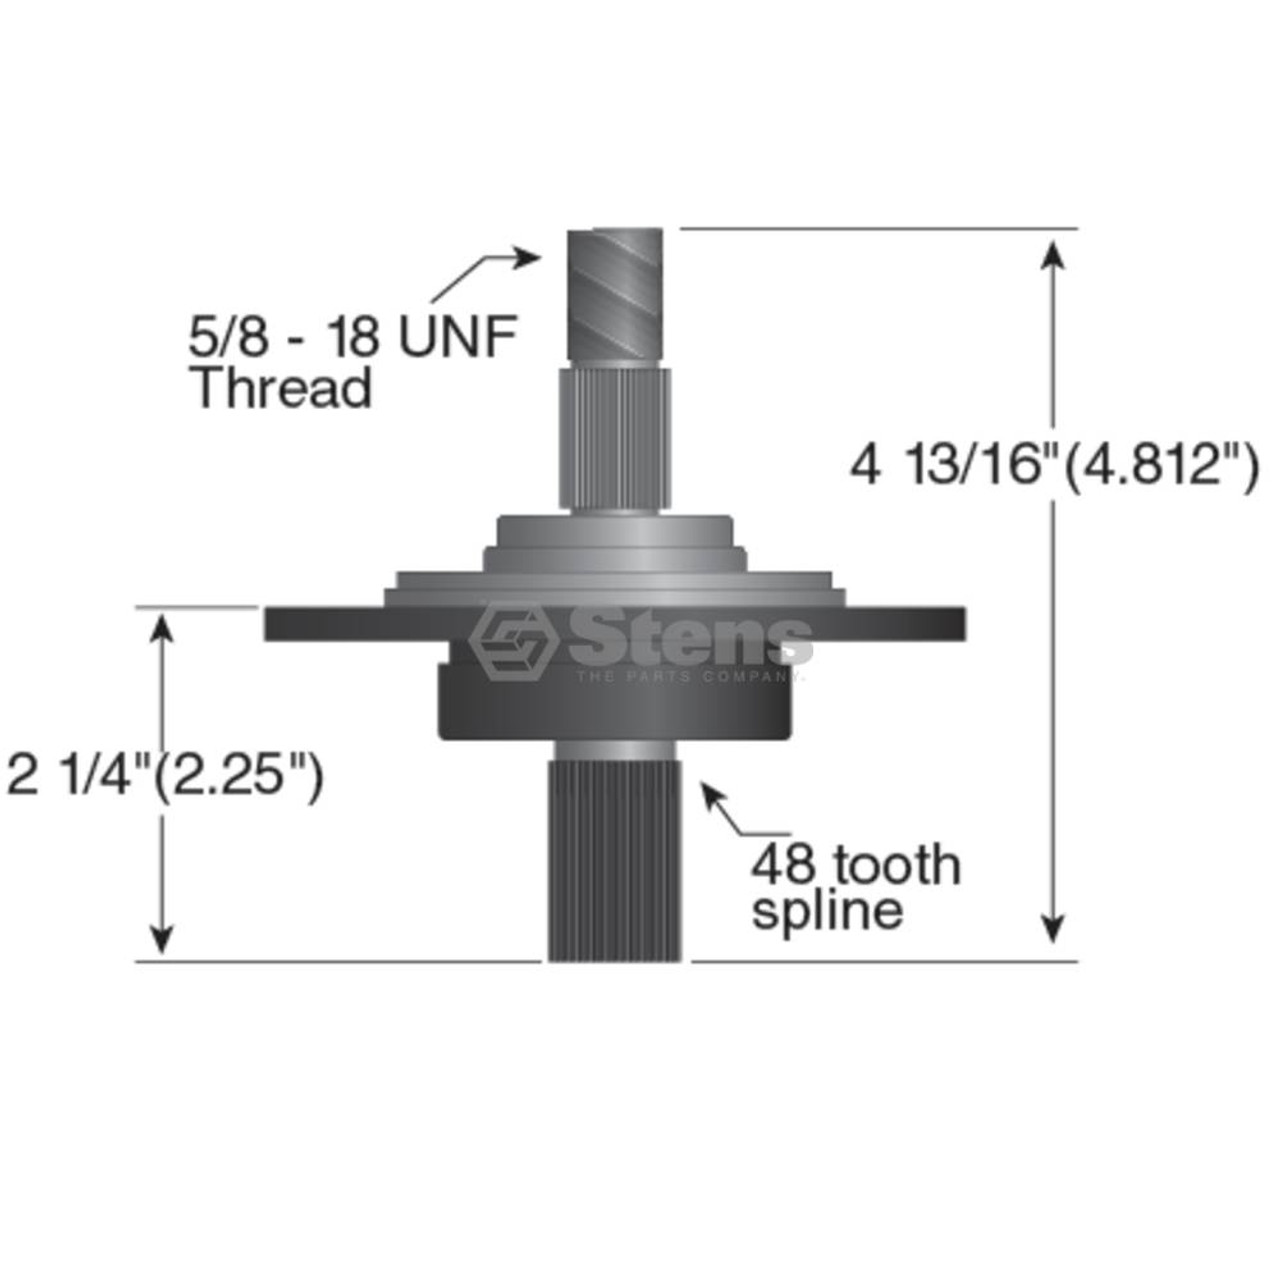 Deck Spindle for MTD 46" Cut, 717-0912, 917-0912